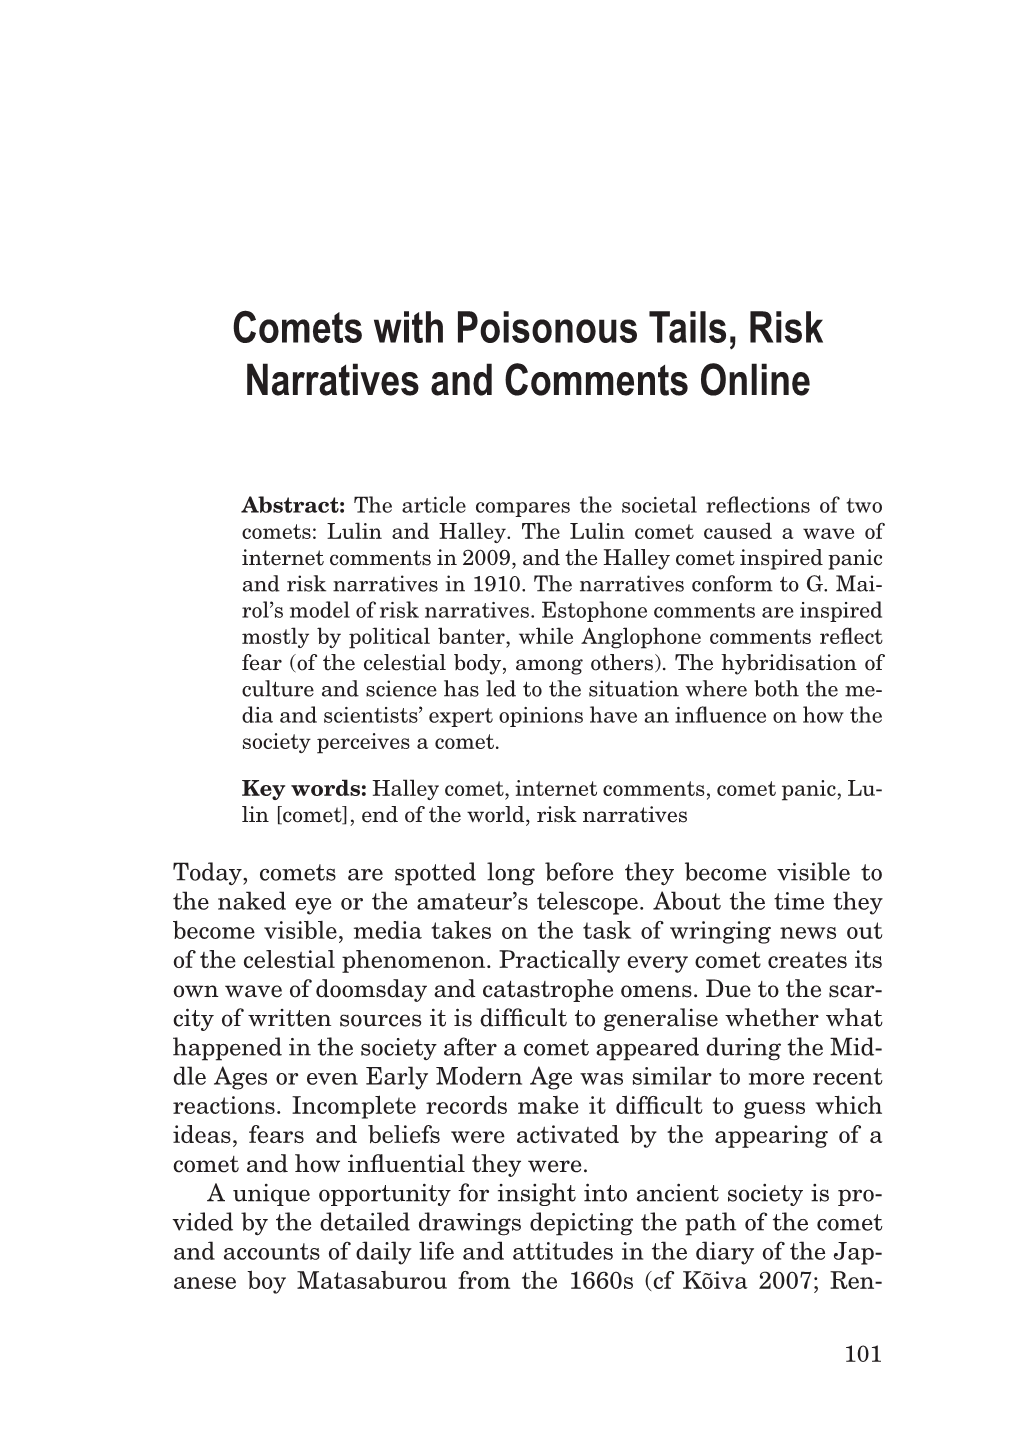 Comets with Poisonous Tails, Risk Narratives and Comments Online